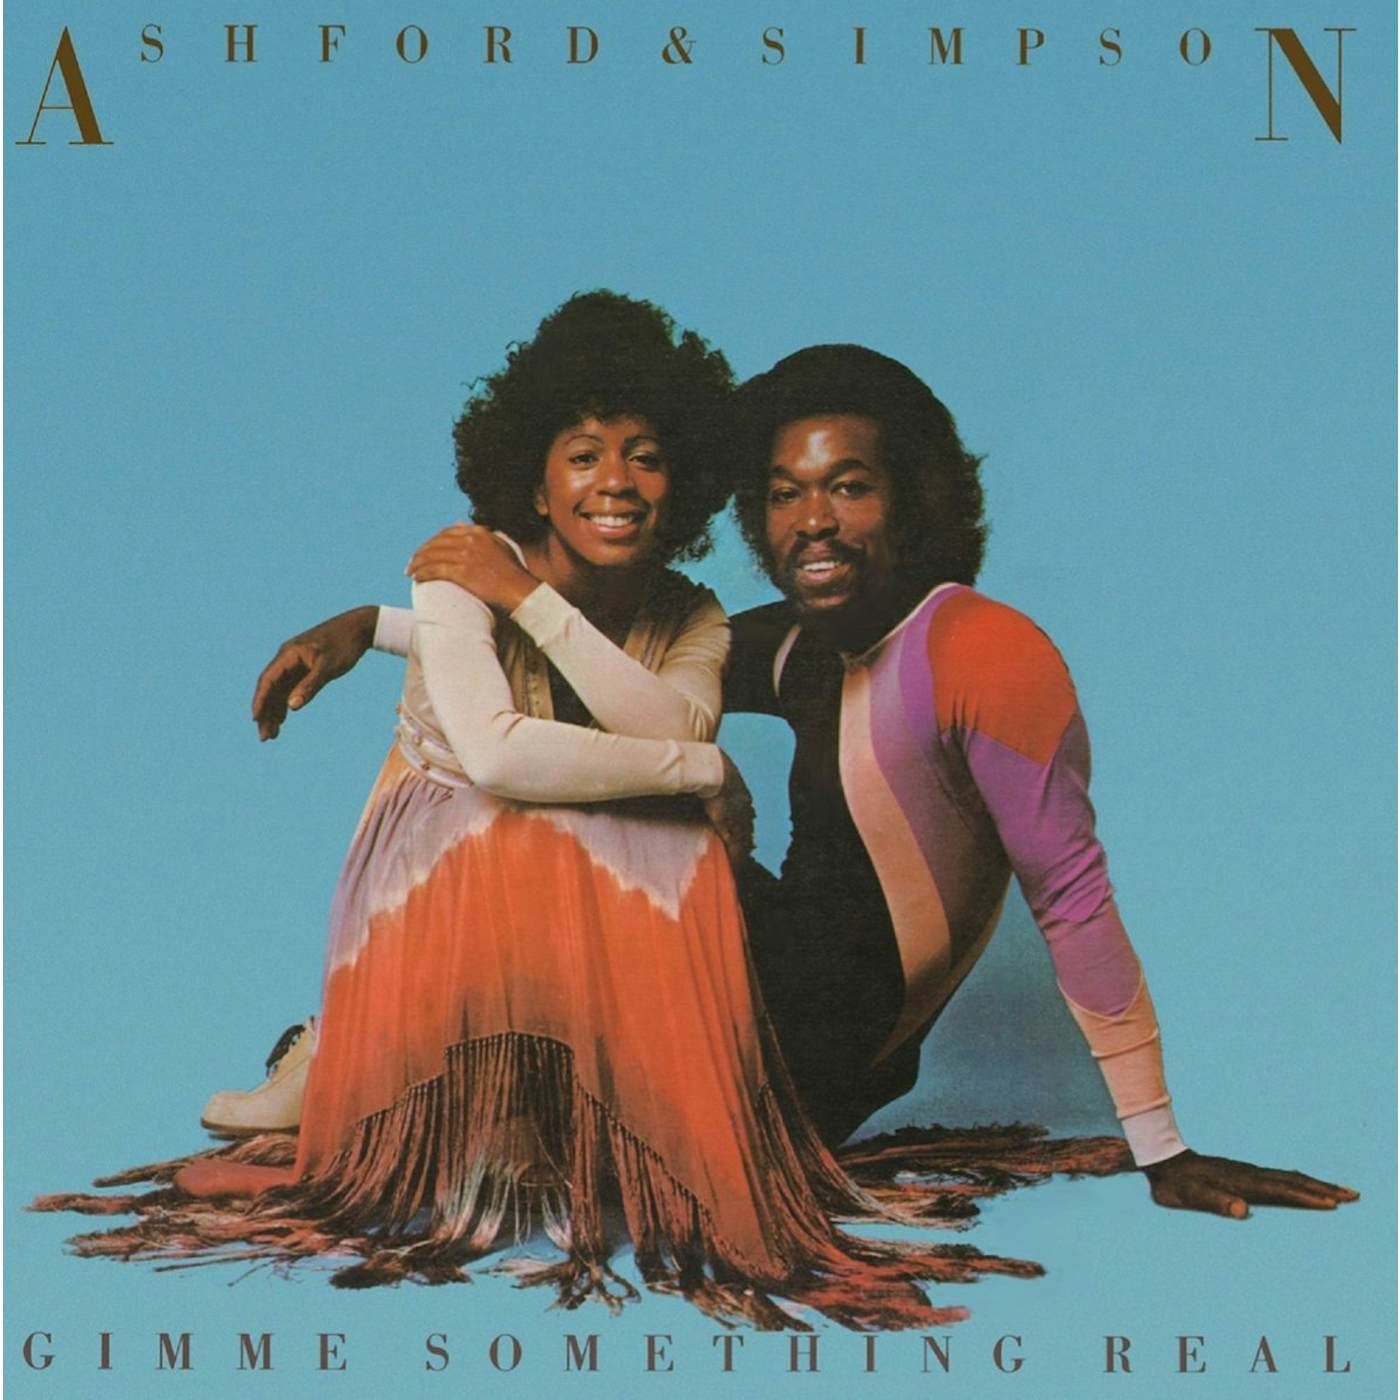 Ashford & Simpson GIMME SOMETHING REAL: EXPANDED EDITION CD